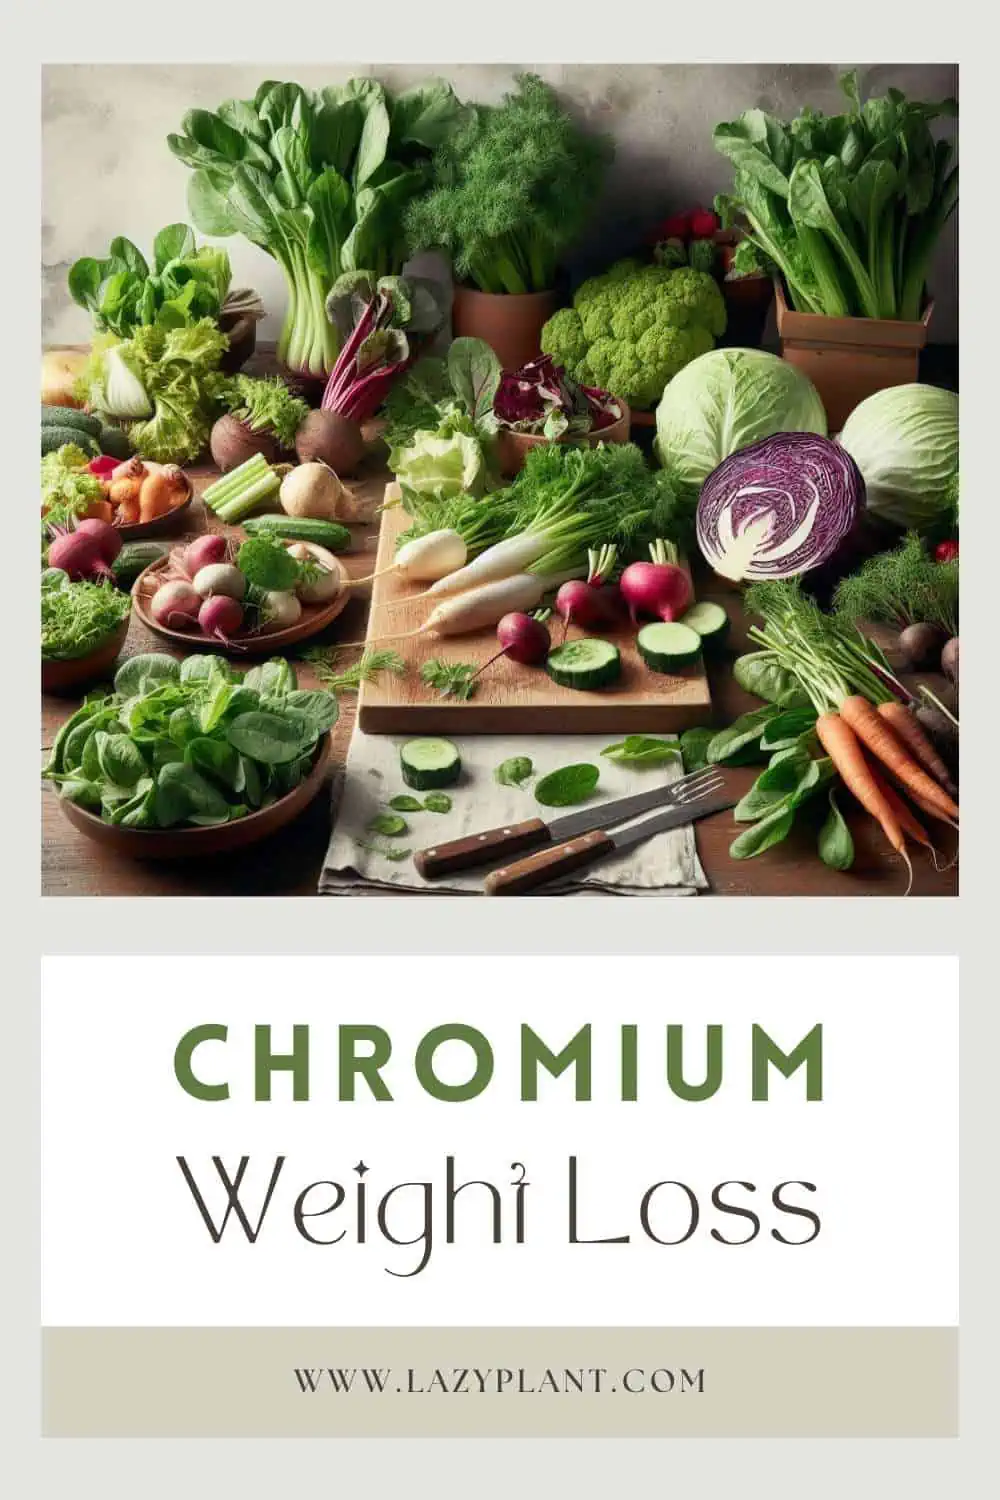 A diet rich in Chromium supports Weight Loss.